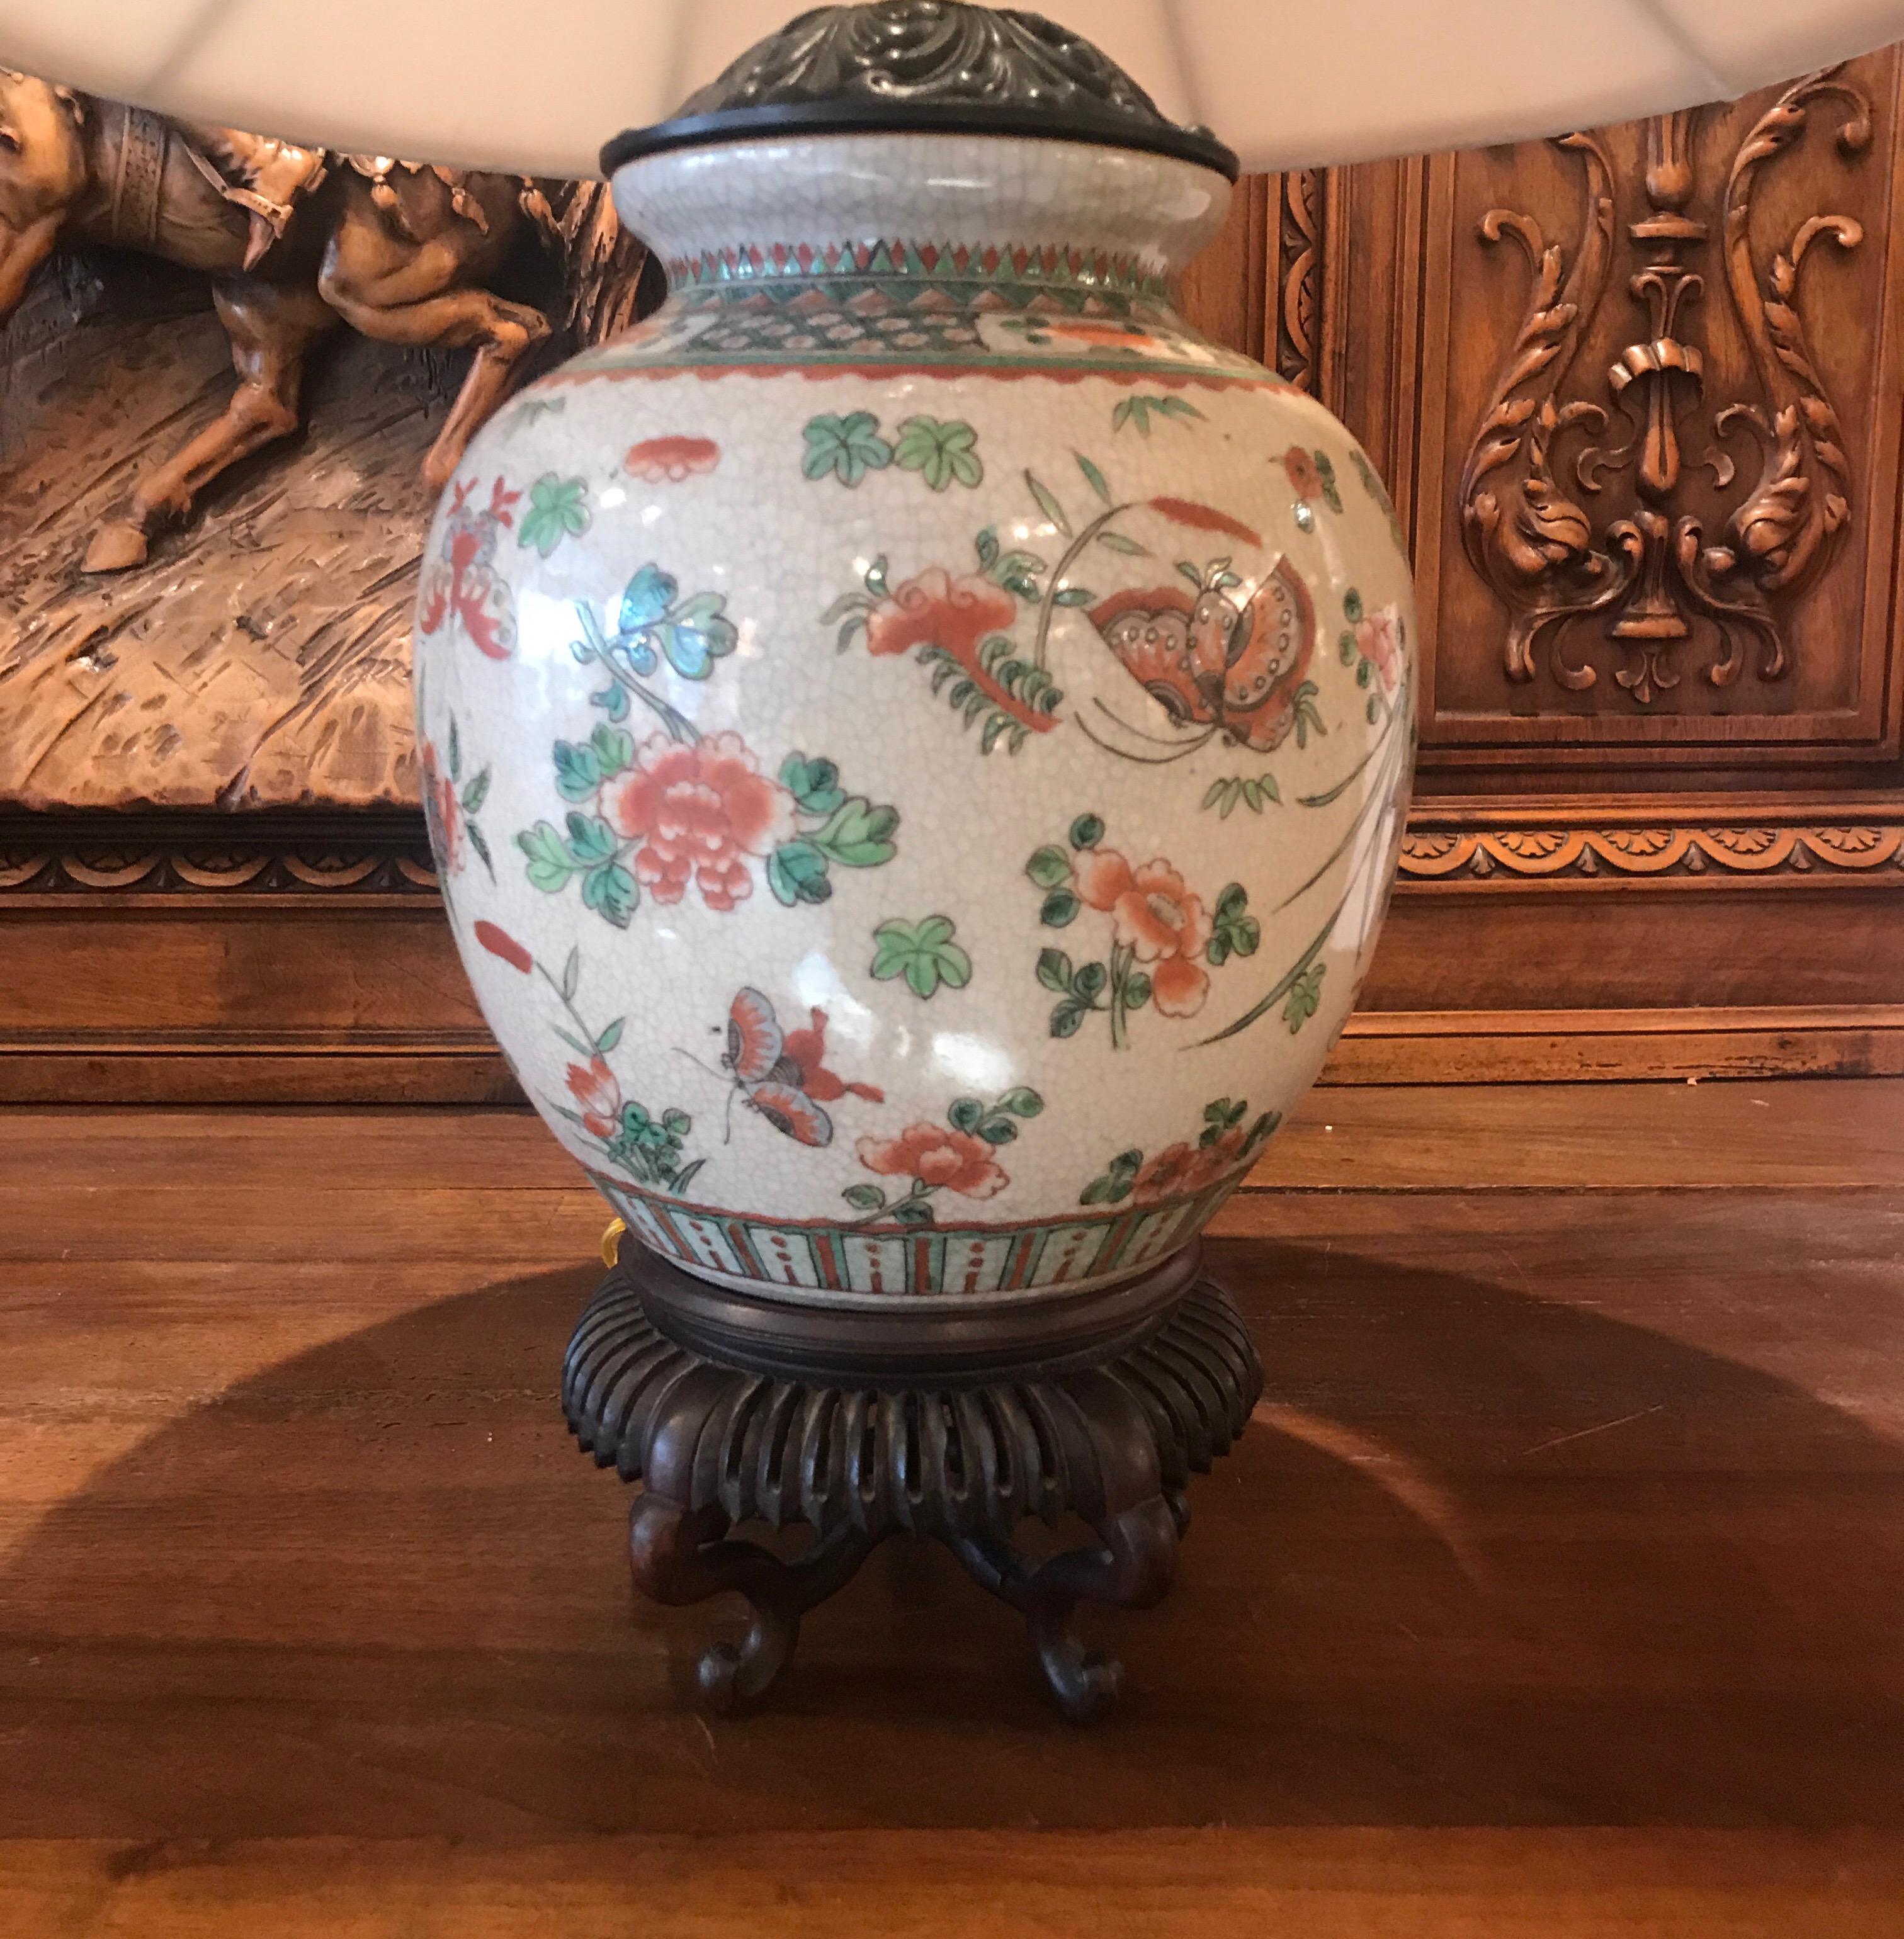 A 19th century hand painted porcelain vase with hand carved rosewood base now as a lamp. This Antique vase was lamped in the first quarter of the 20th century with hand-painted floral decoration with a slight crackles glaze. The base is a